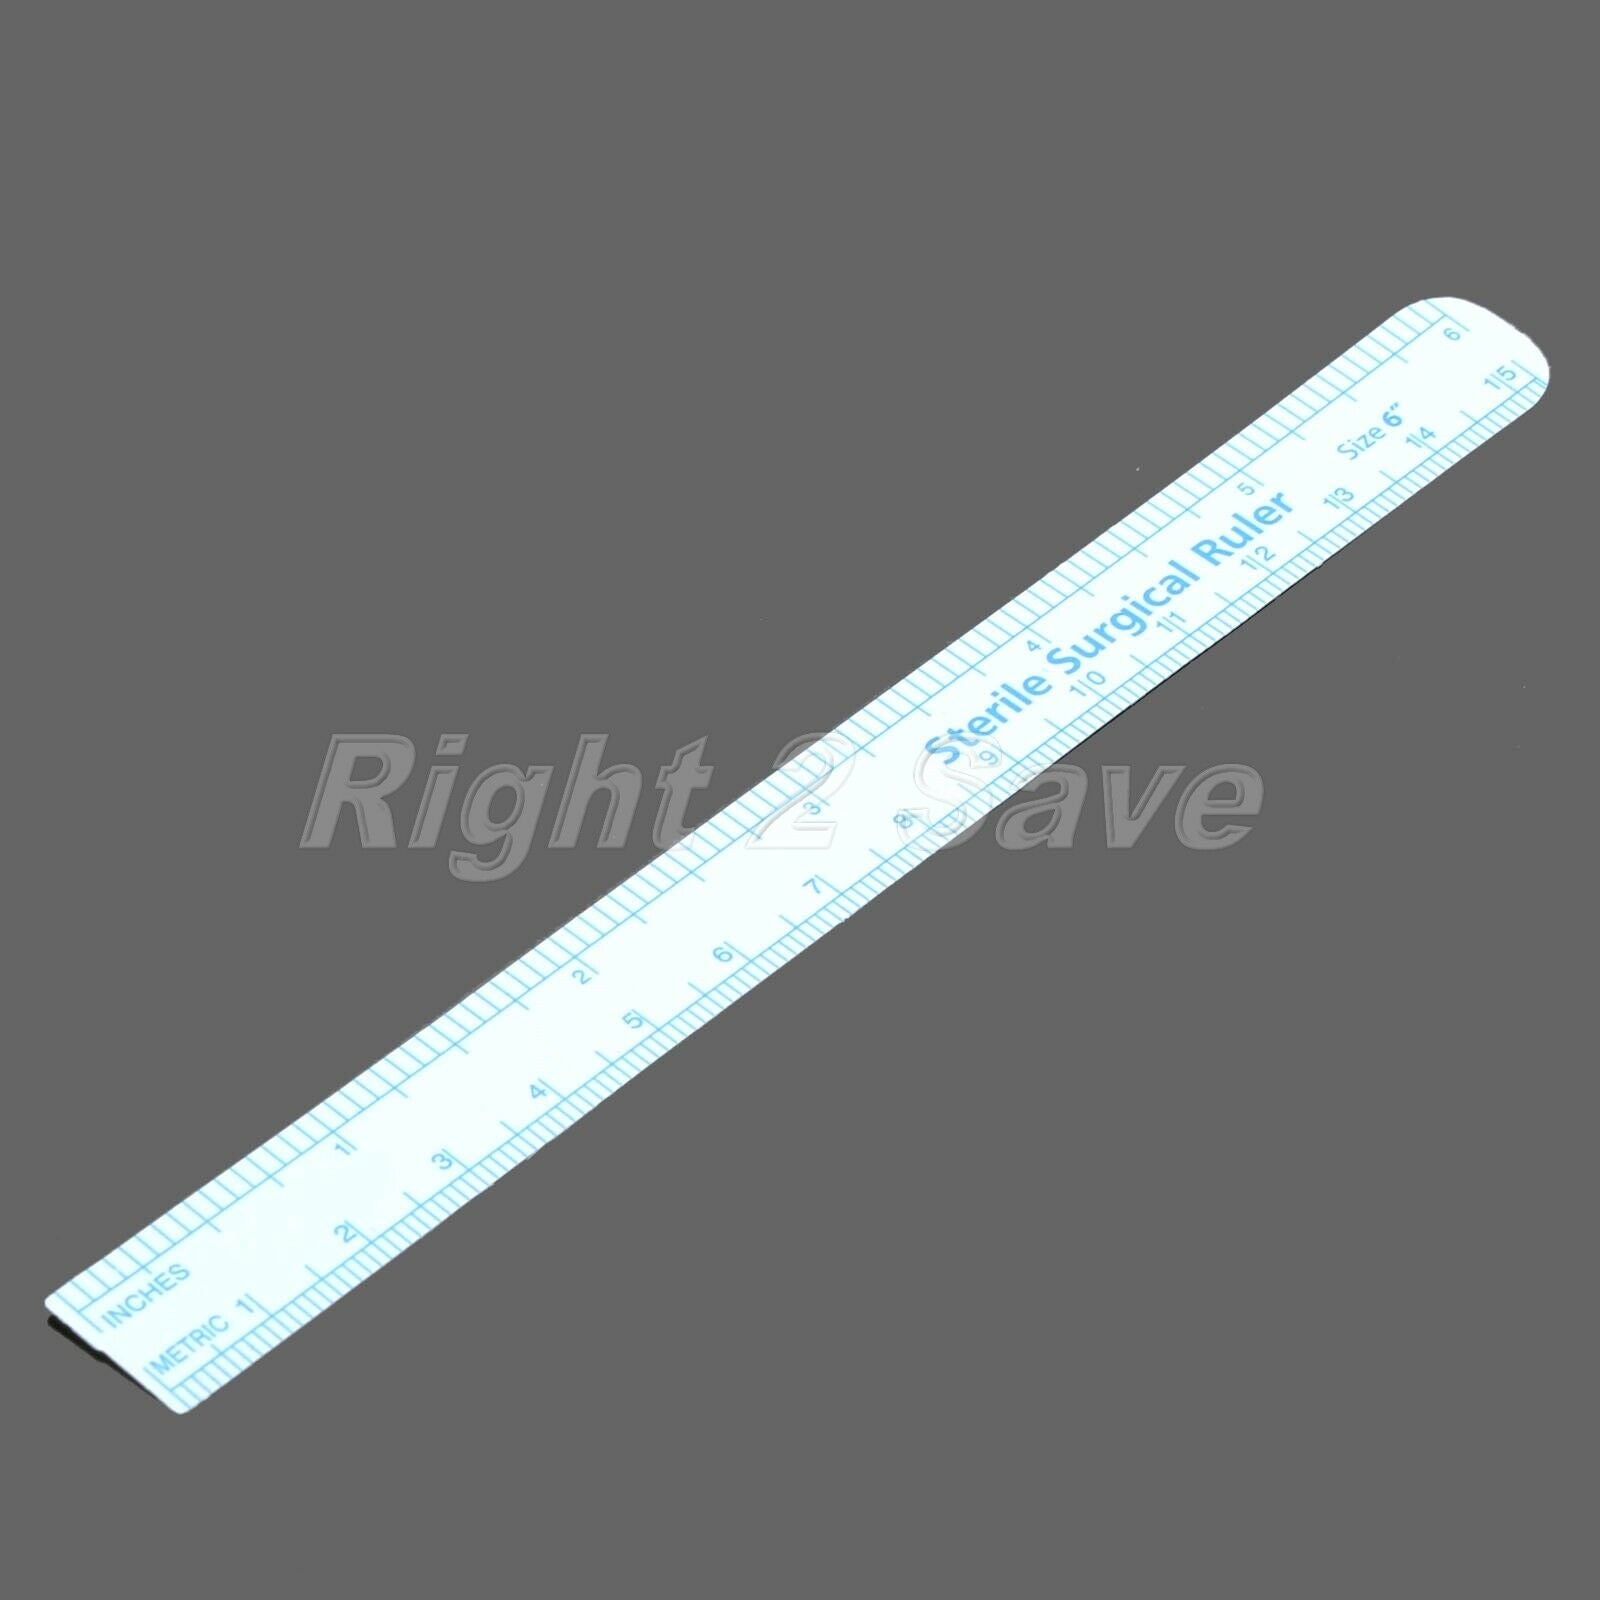 1/5Set Surgical Skin Marker Pen+Ruler For Tattoo Stencil Body Piercing Accessory